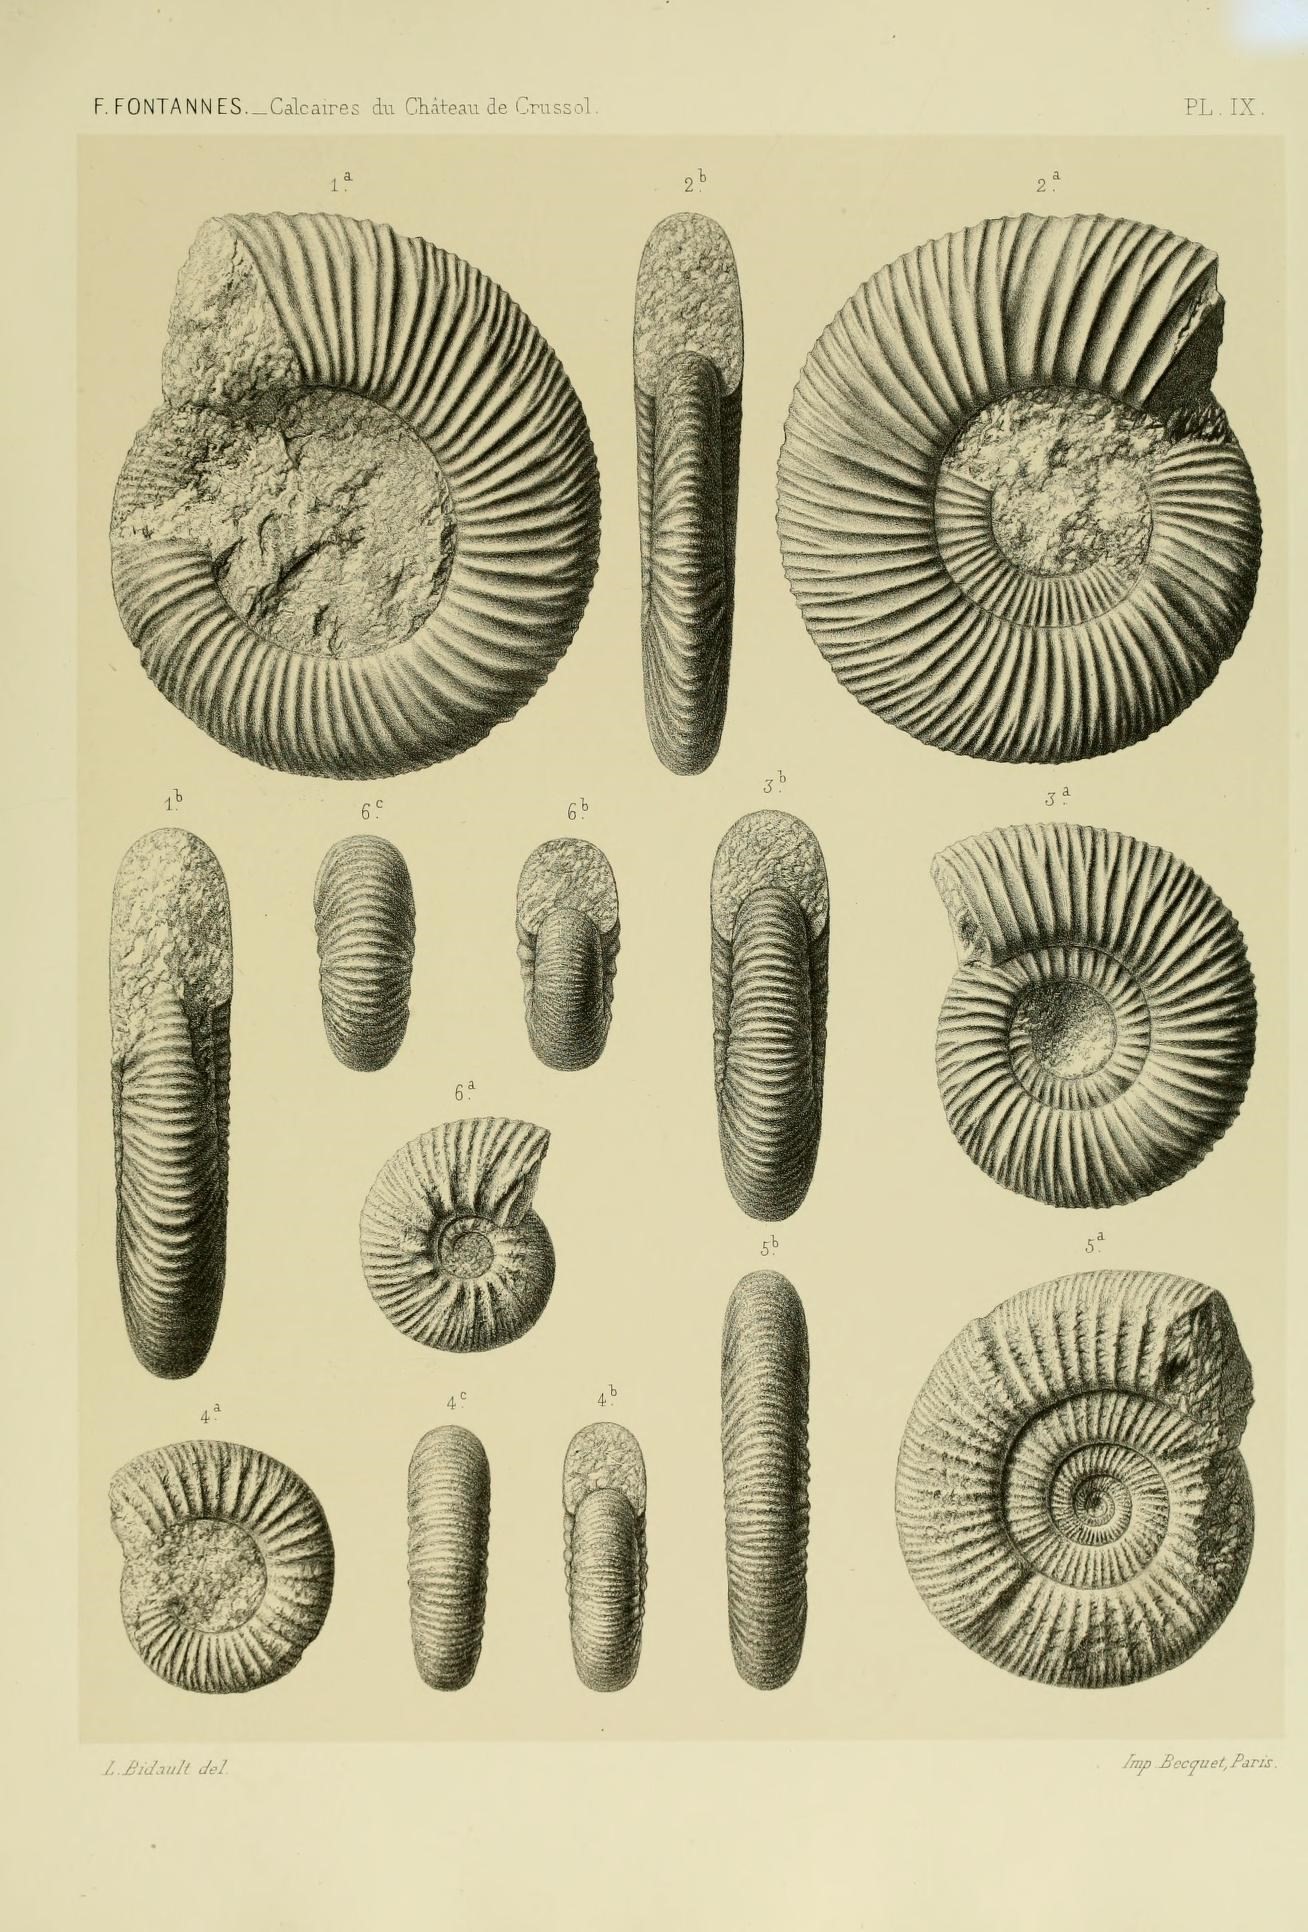 some drawings of some type of coral that is similar to other animals